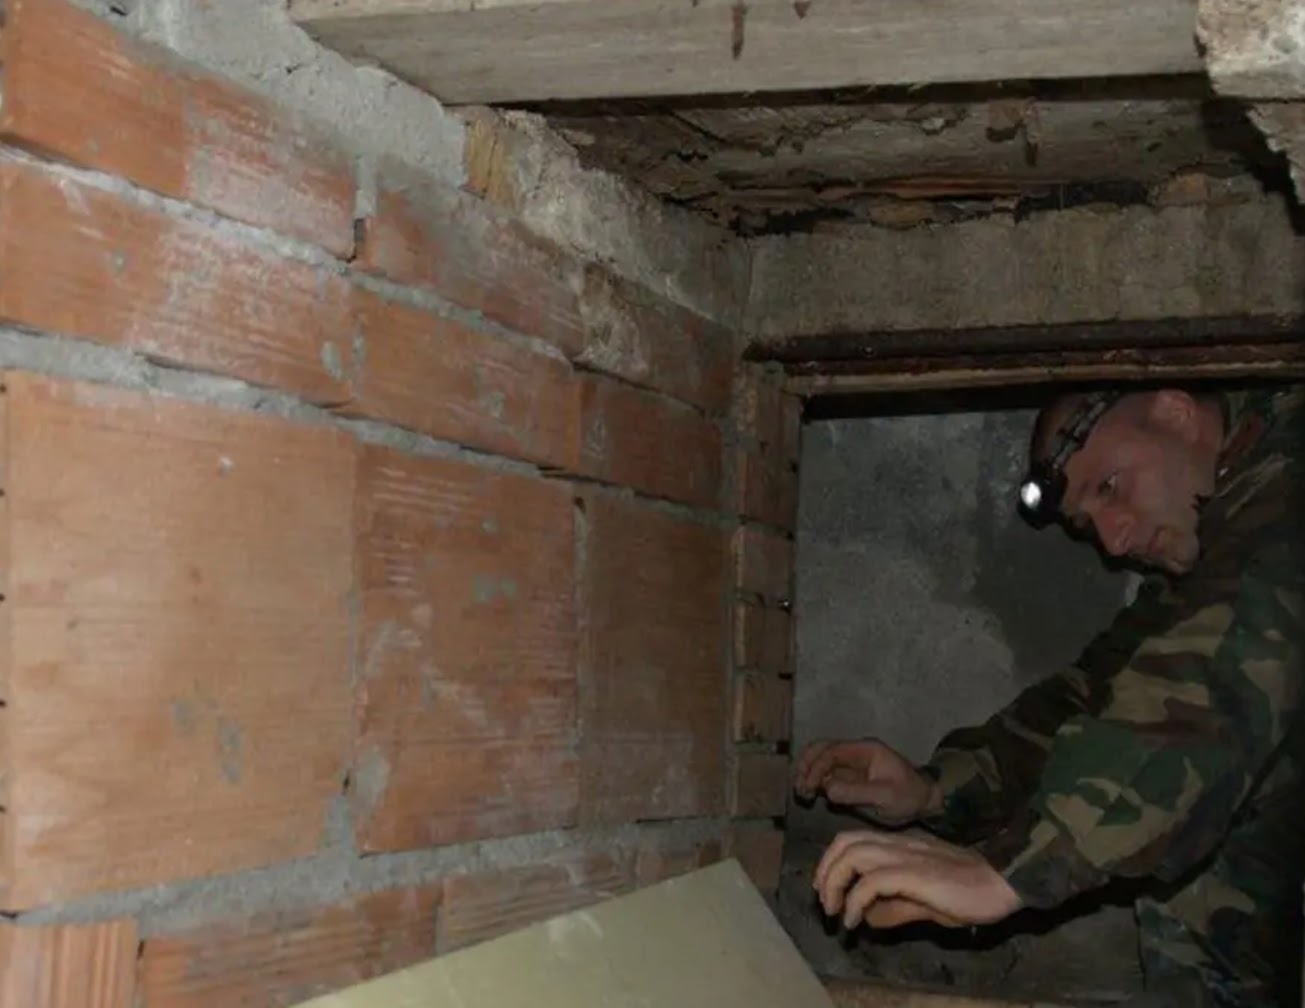 Authorities found a complex of tunnels under the town of Plati, Italy